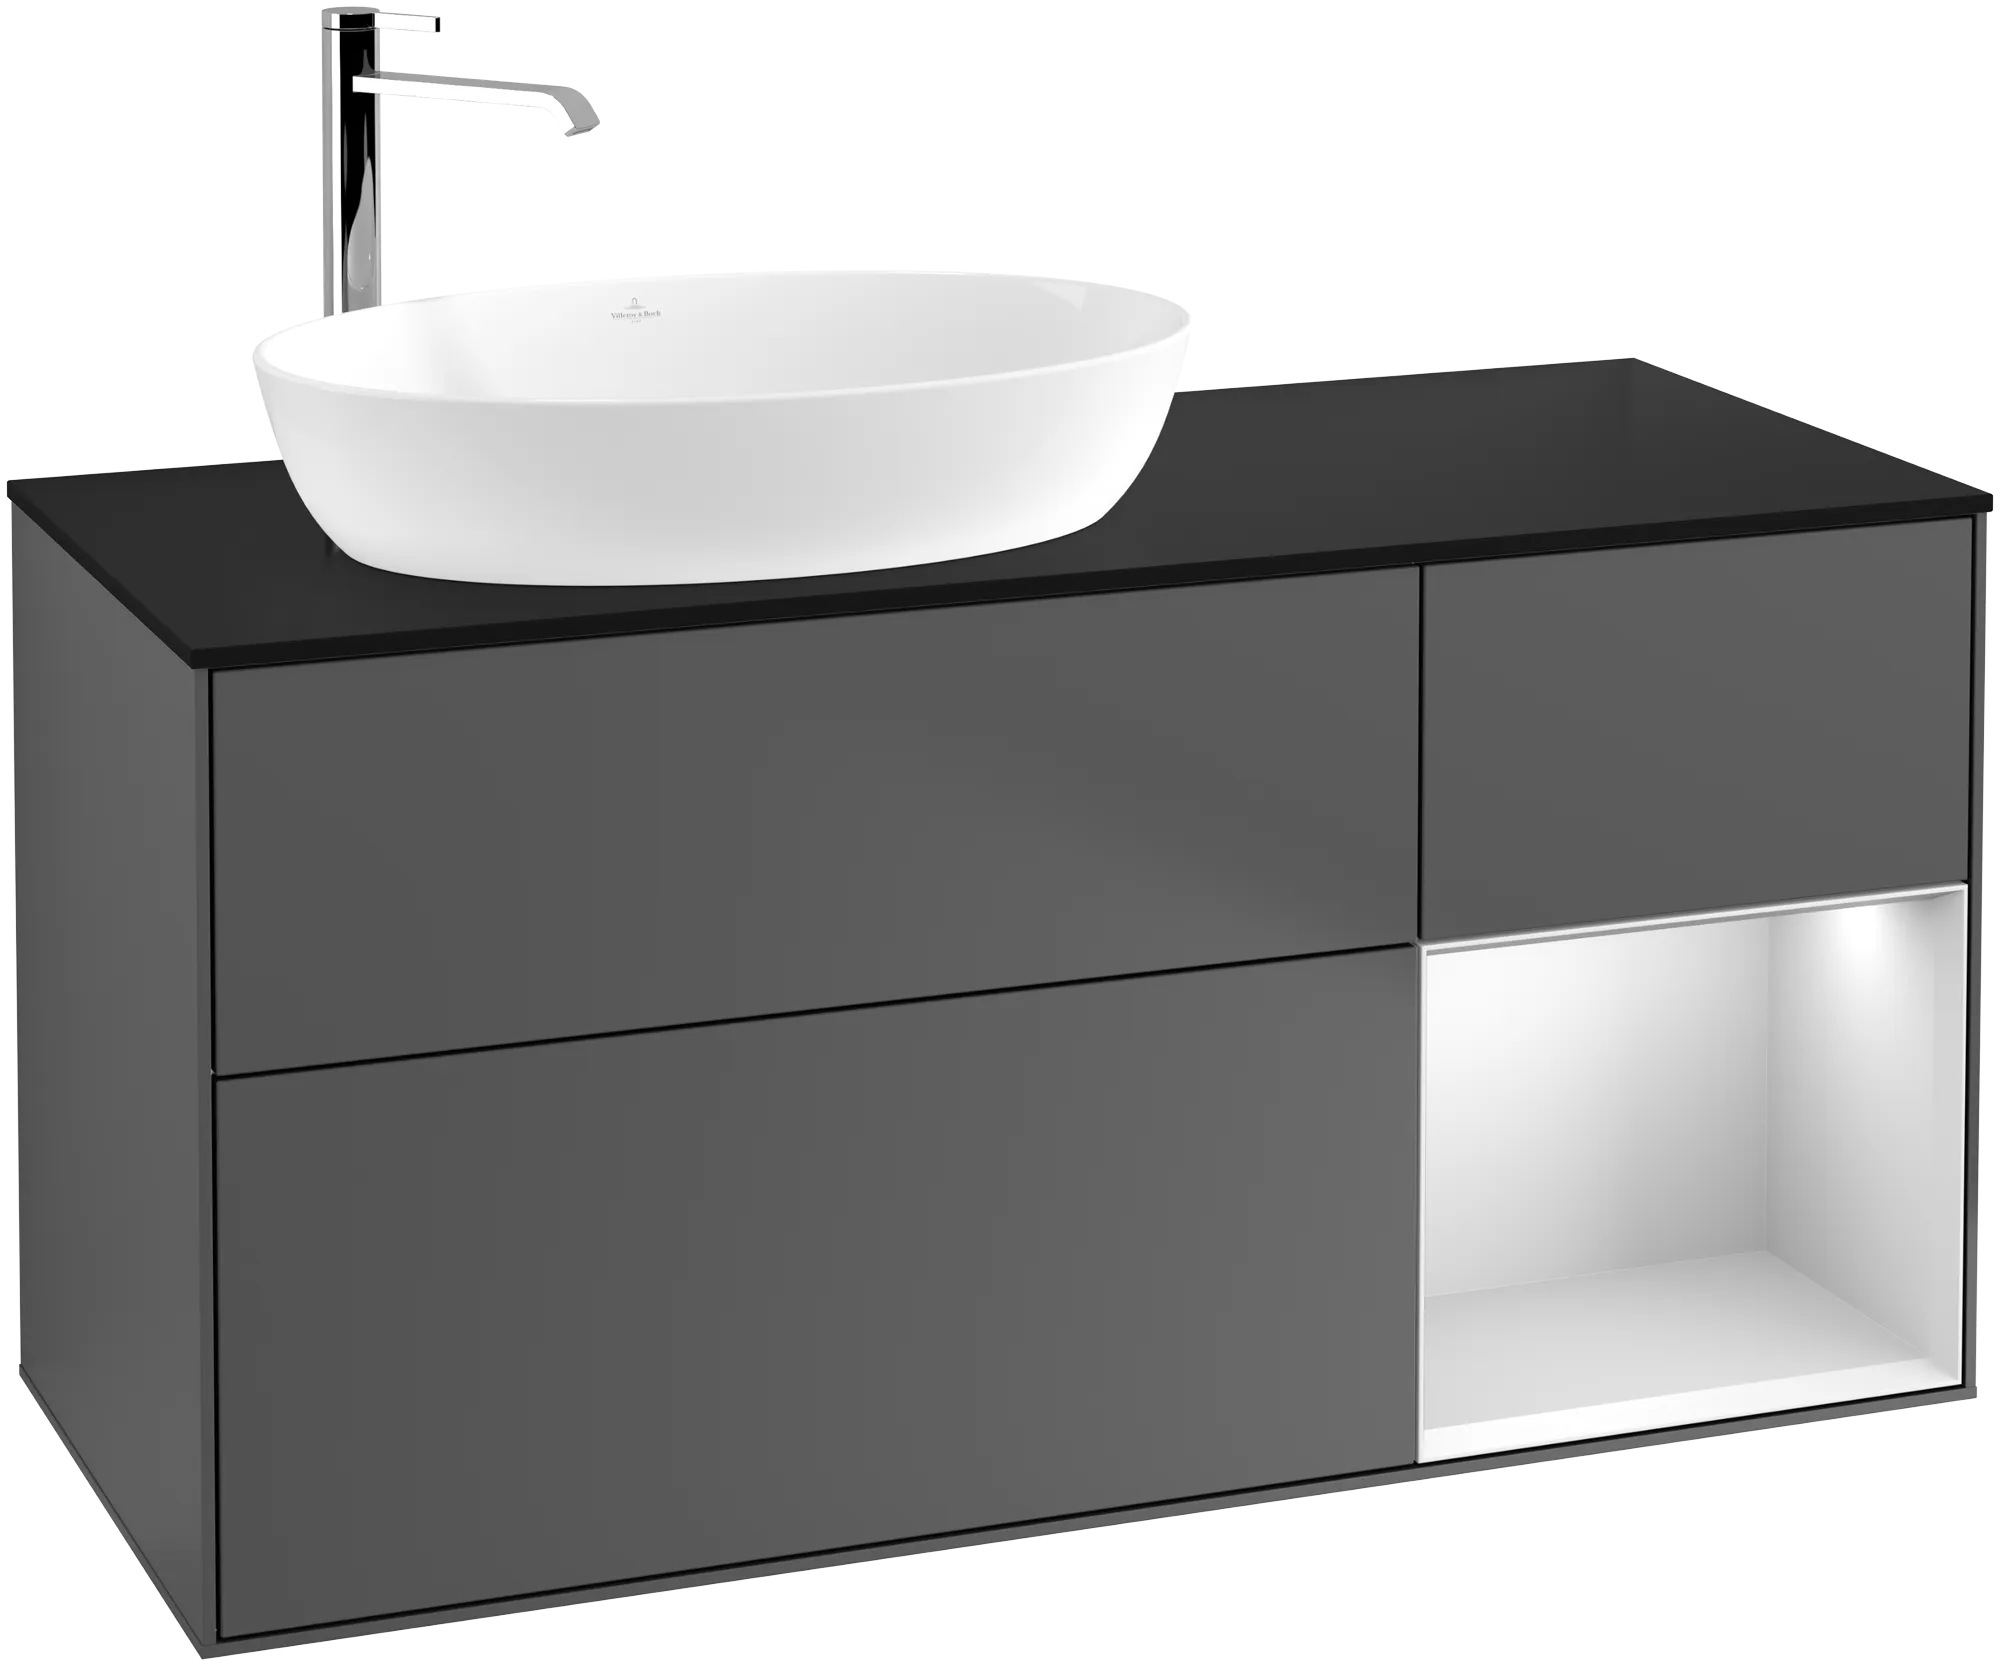 Picture of VILLEROY BOCH Finion Vanity unit, with lighting, 3 pull-out compartments, 1200 x 603 x 501 mm, Anthracite Matt Lacquer / White Matt Lacquer / Glass Black Matt #G932MTGK